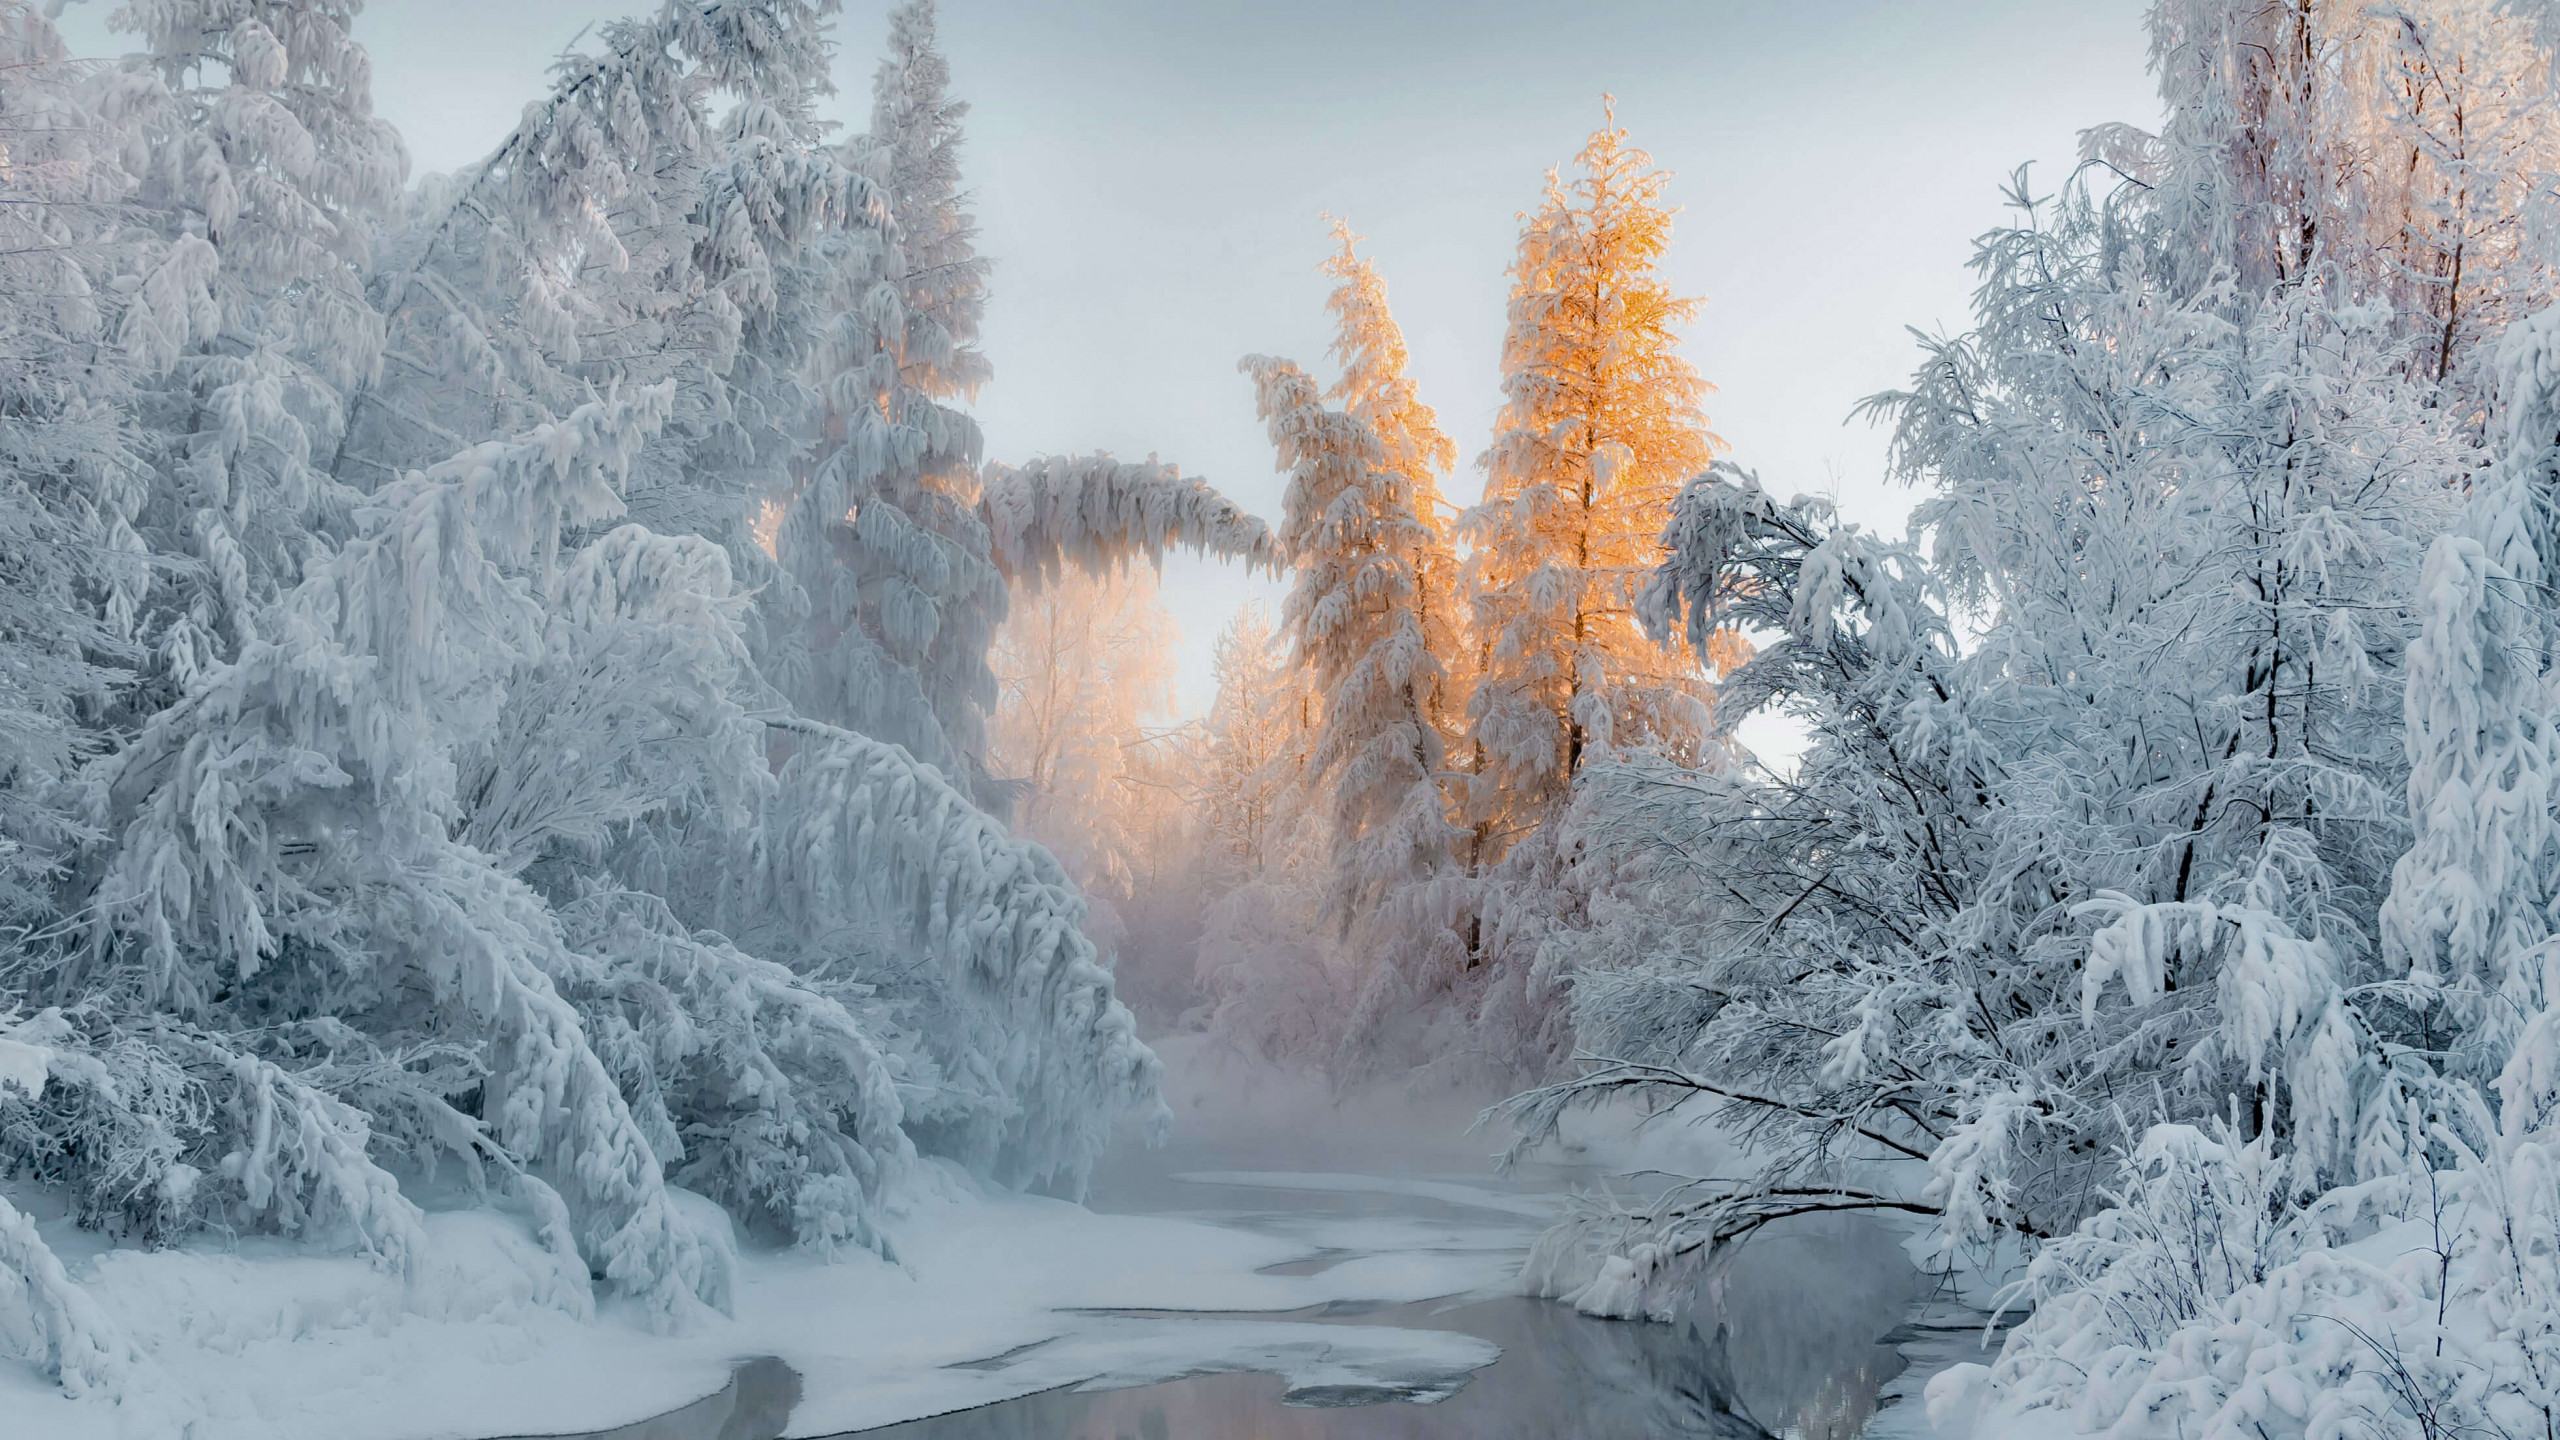 Wallpaper winter, forest, snow, trees, 4K, Nature #23950 - Page 2